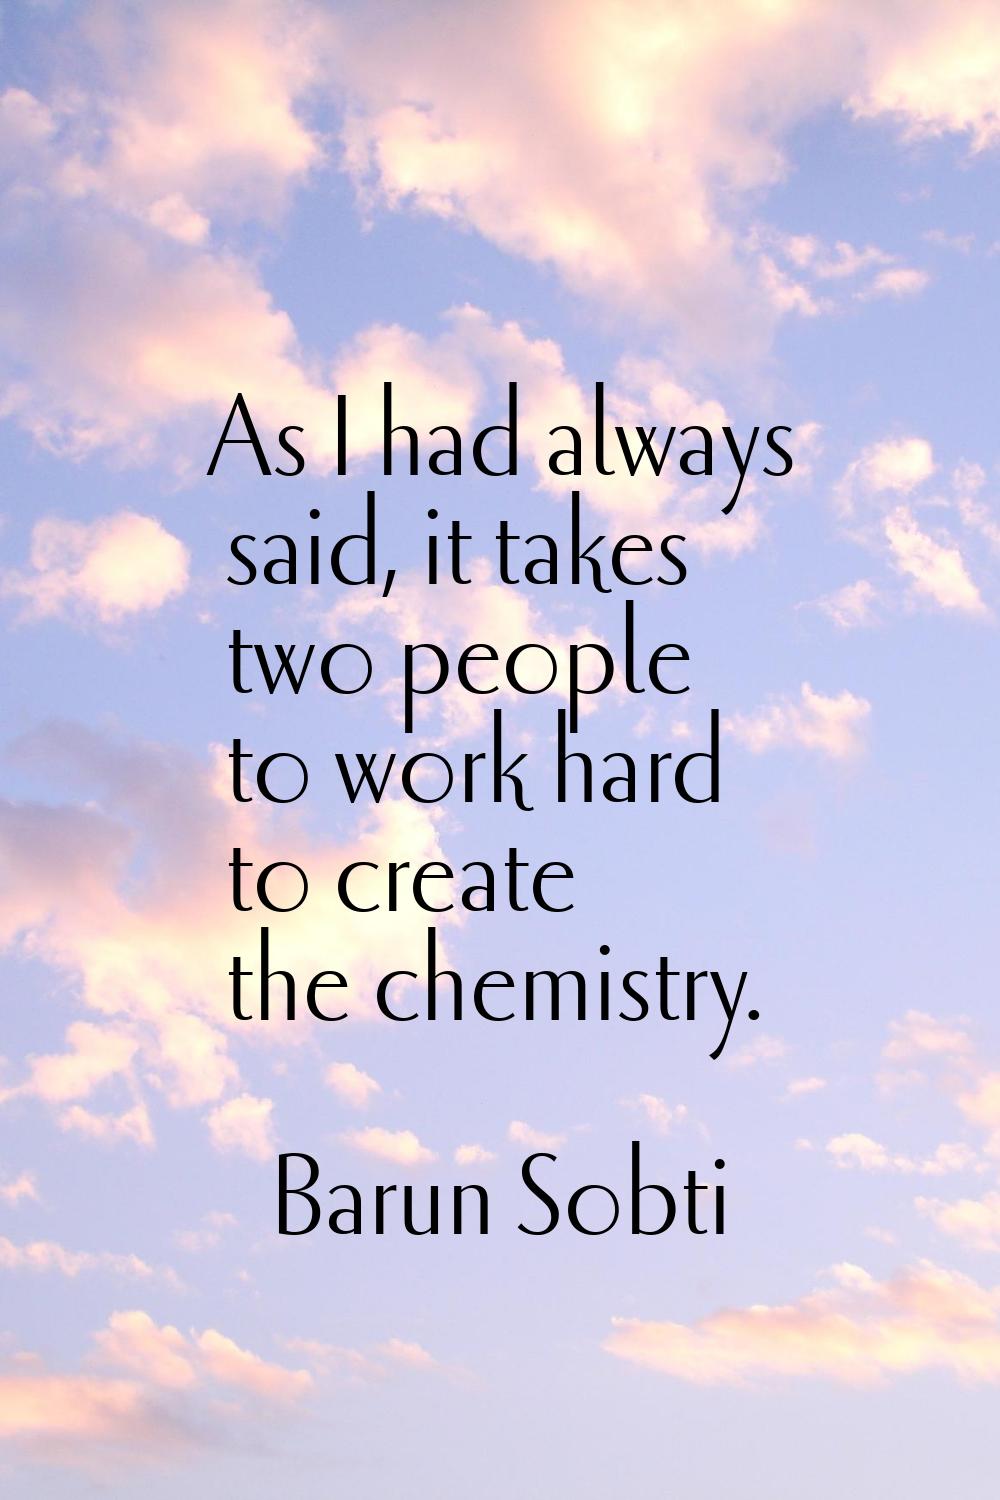 As I had always said, it takes two people to work hard to create the chemistry.